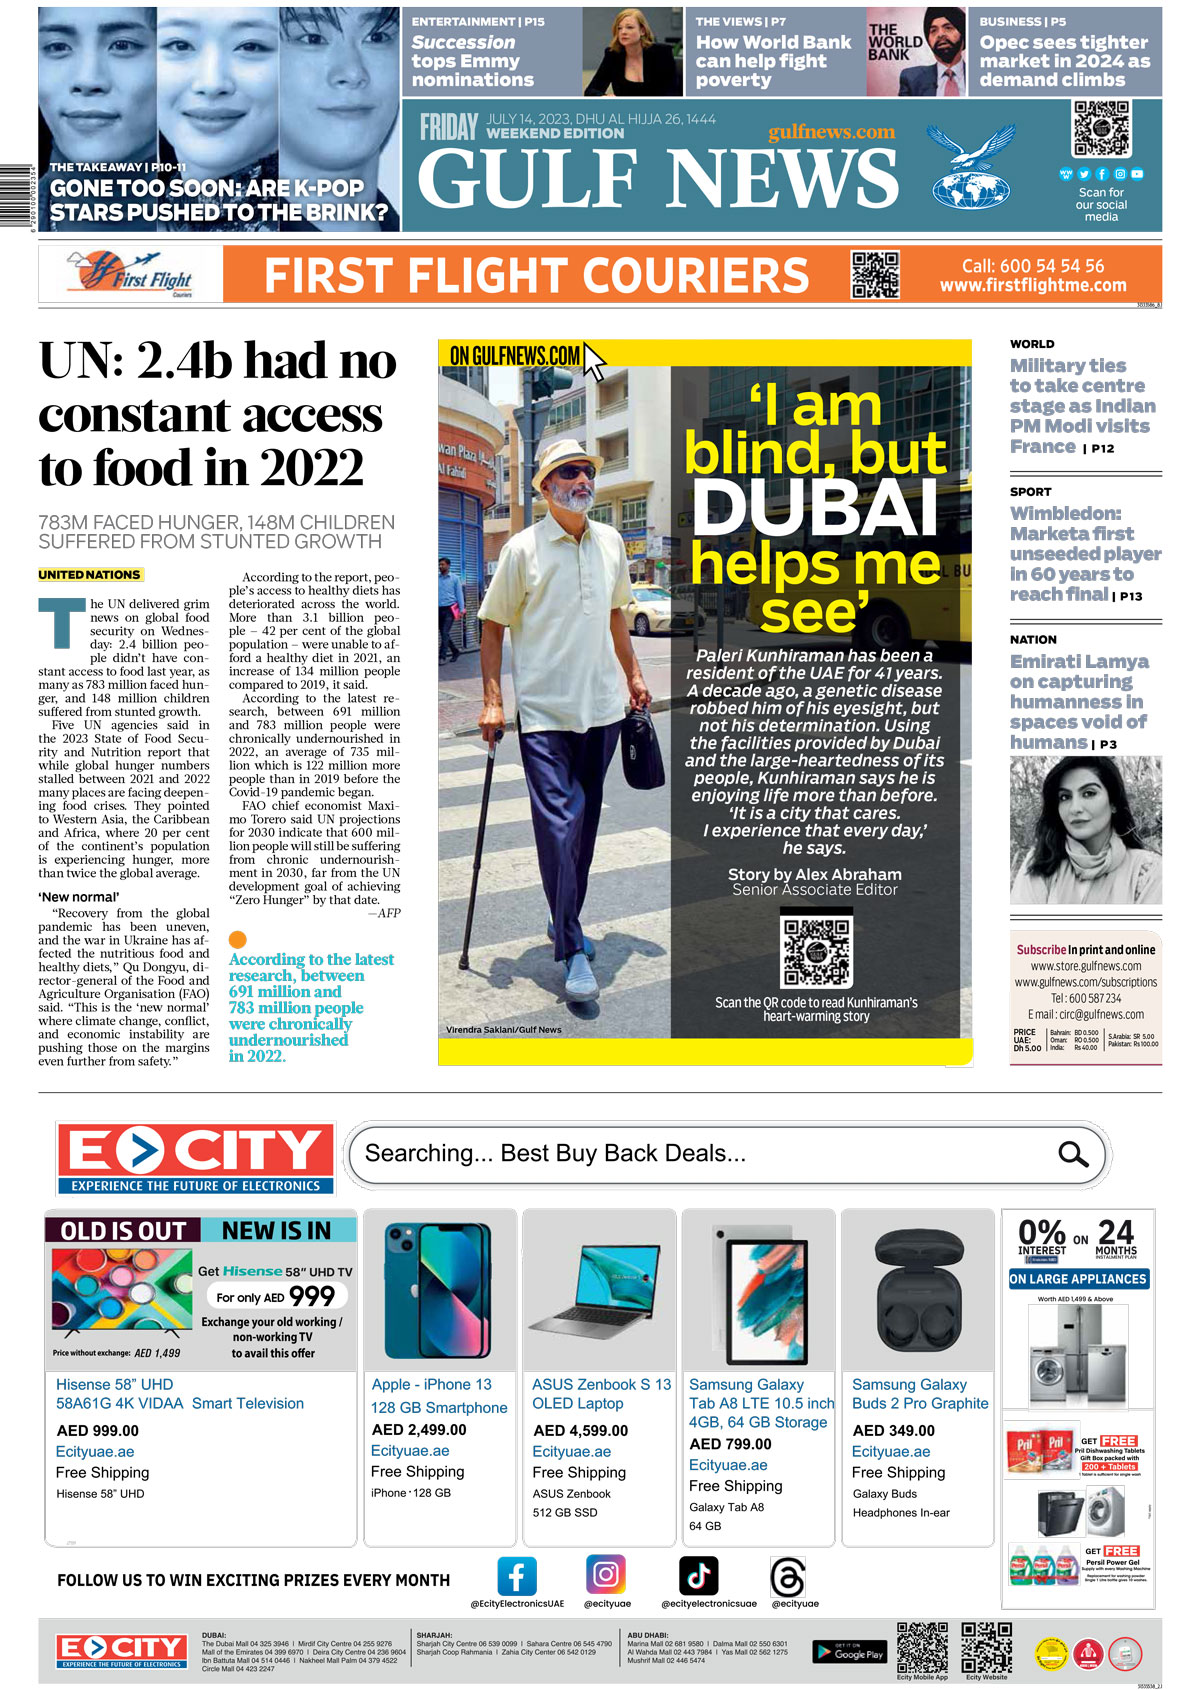 I Am Expat News Gulf News on Twitter: "#Frontpage 'I am blind, but #Dubai helps me see',  says Indian expat, Suicides: Are #Kpop stars pushed to the brink?; UN: 2.4b  had no constant access to food